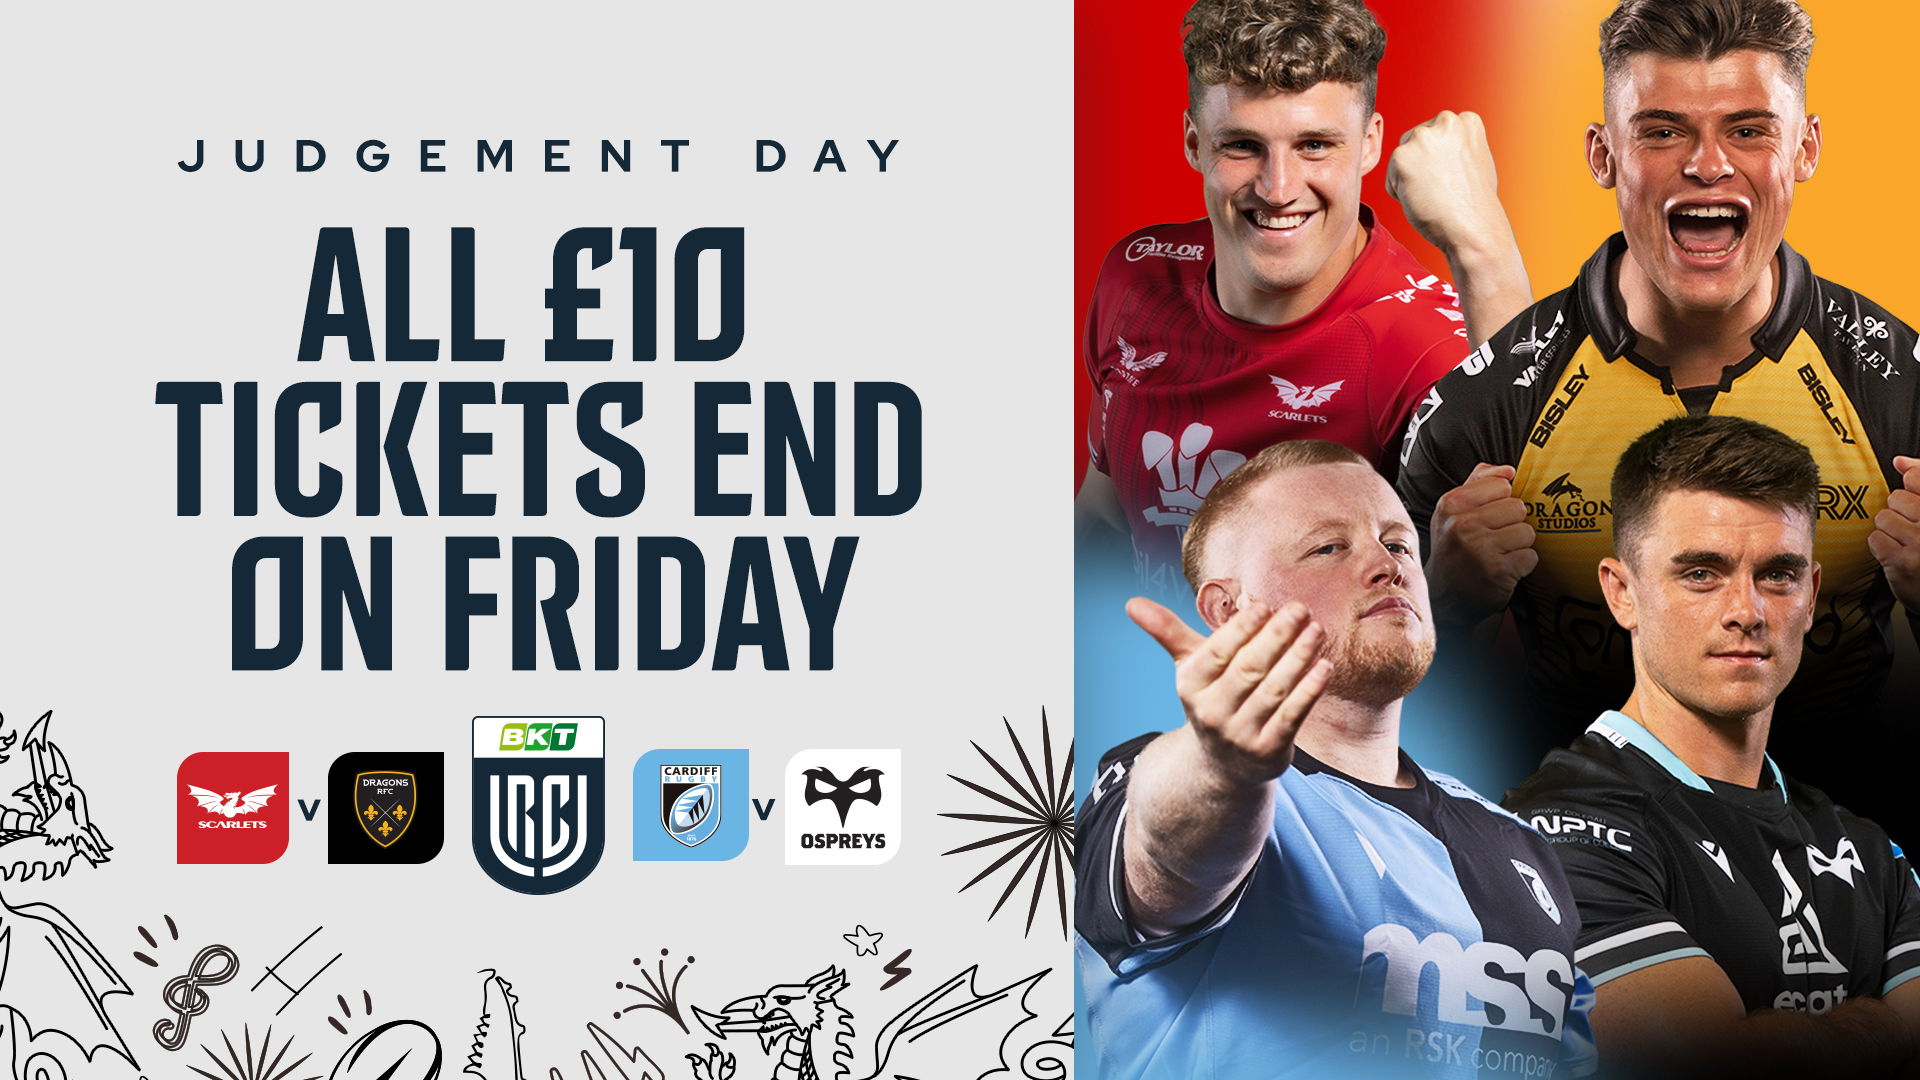 Judgement Day £10 tickets end on Friday